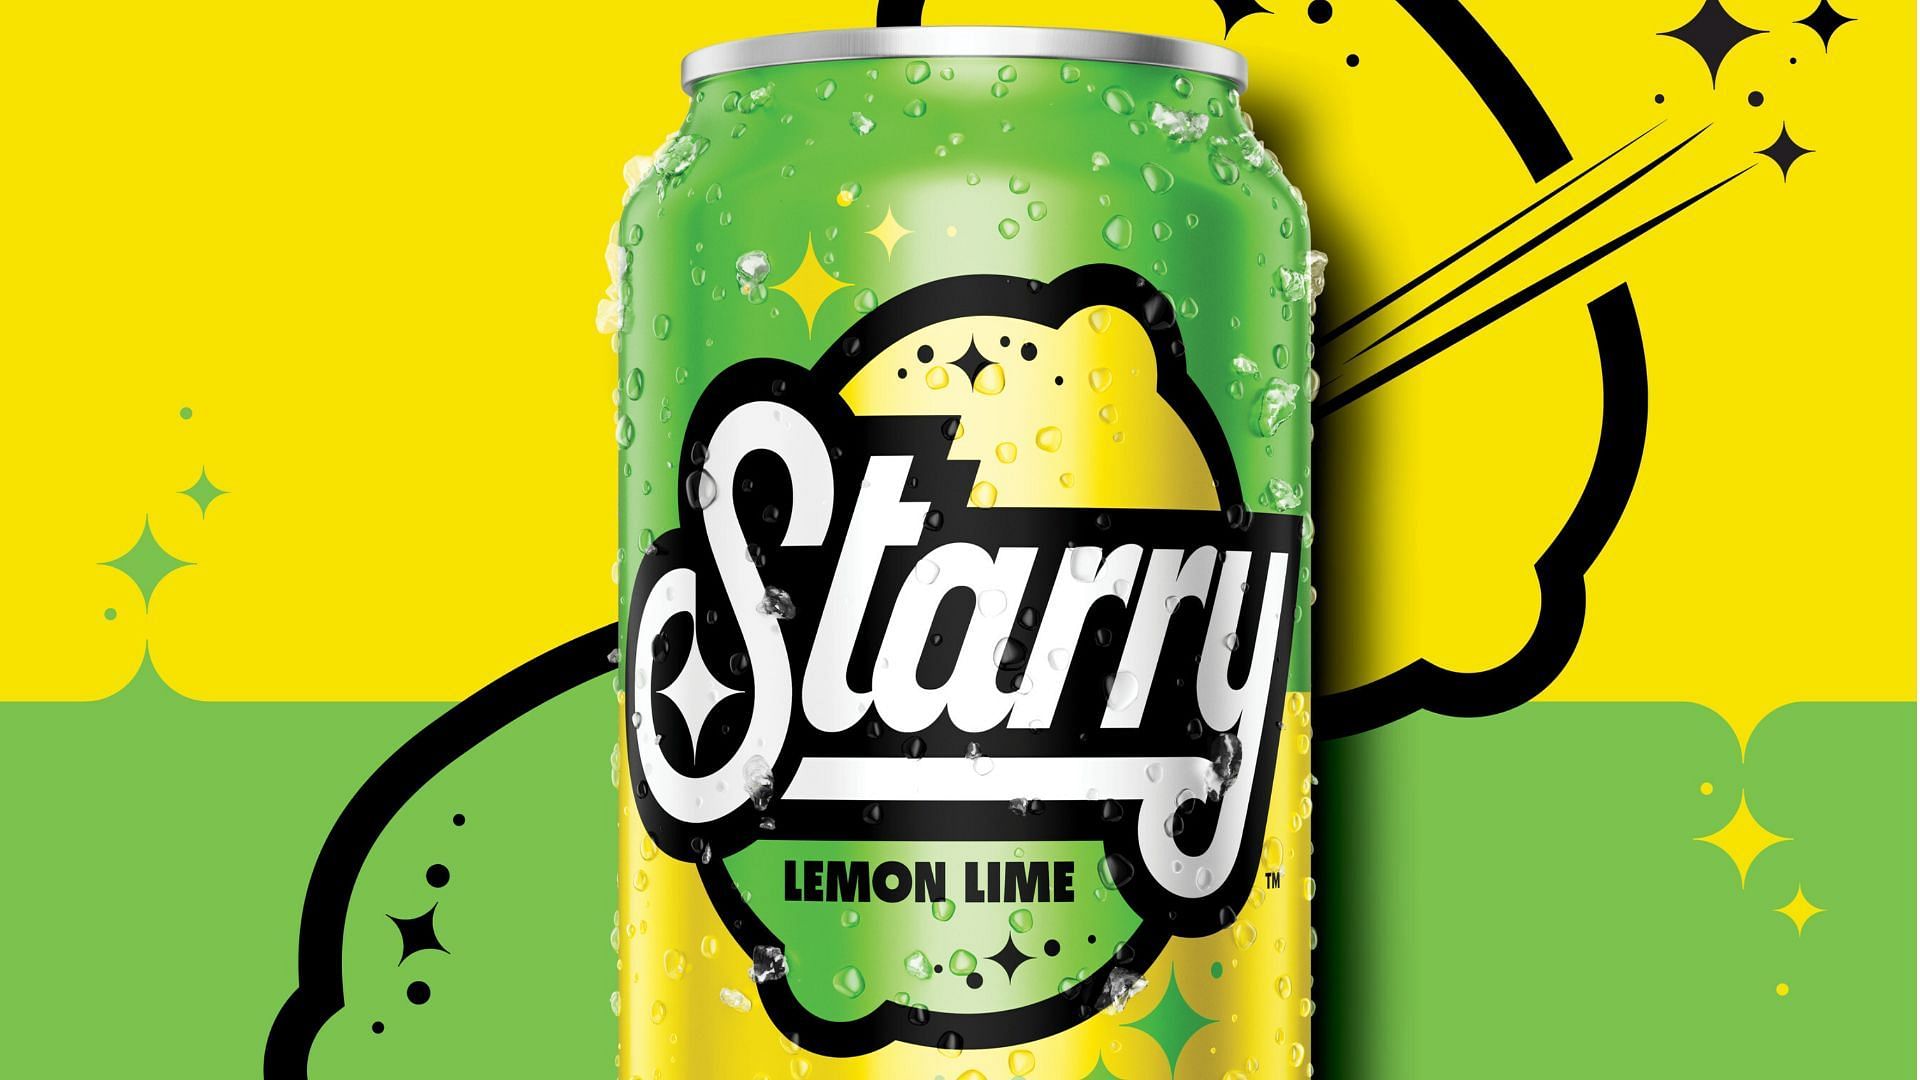 Starry will be available in regular and sugar-free variants in canned and PET bottles across the United States (Image via PepsiCo)